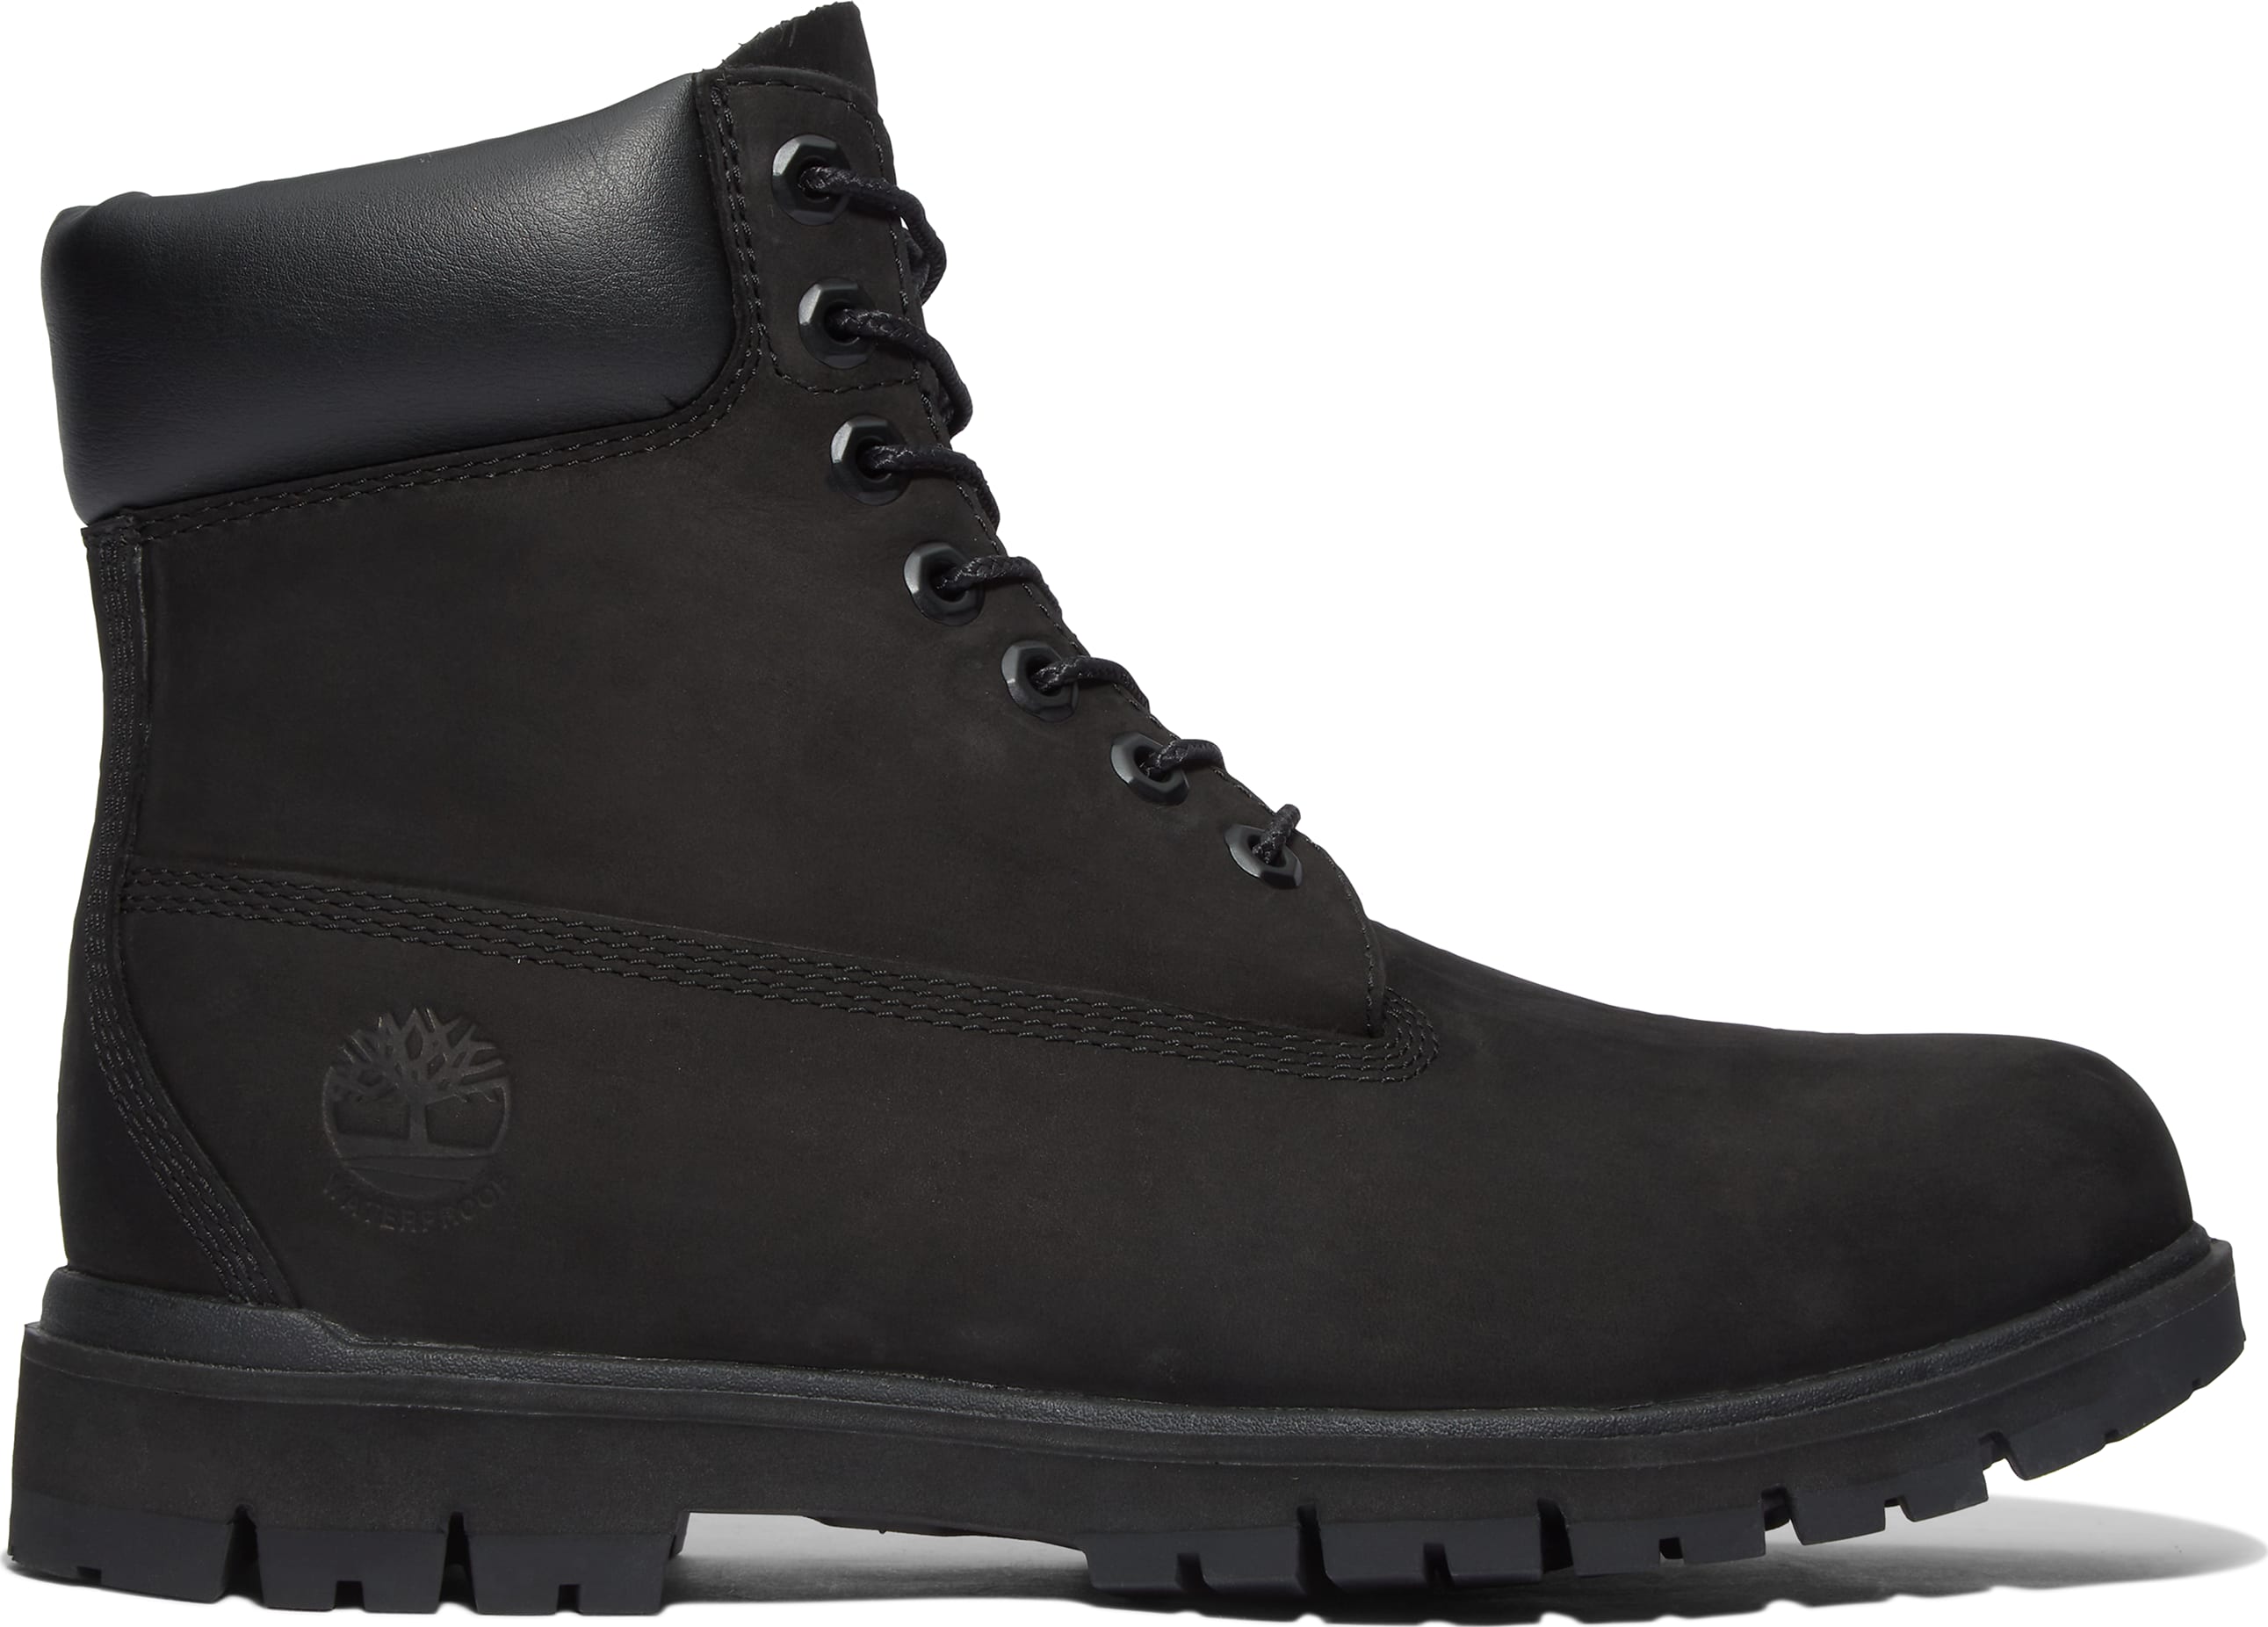 Timberland Men's Radford 6 Inch Boot Outnorth